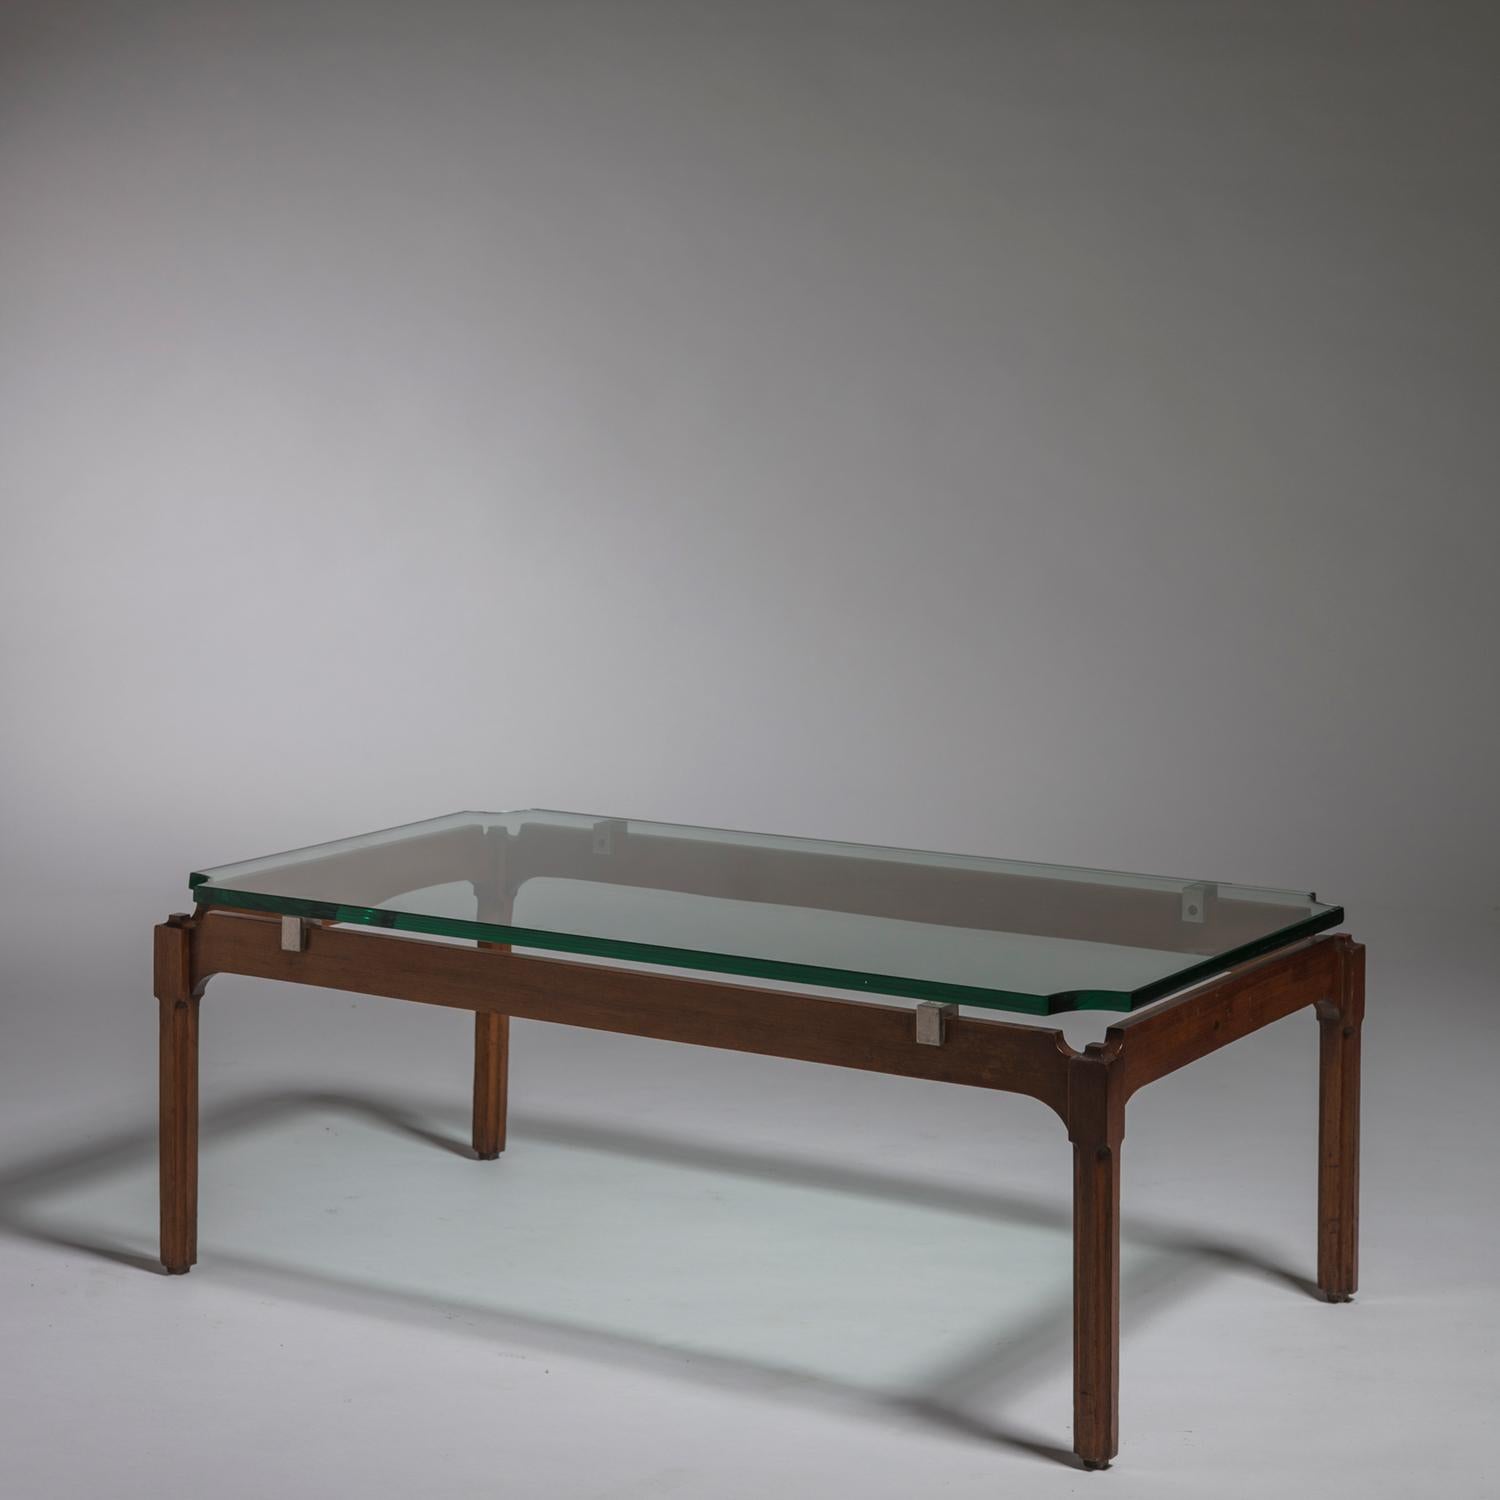 Rare low table by Adelmo Rascaroli.
Wood frame with accurate details, brass details and glass top with rounded edges.